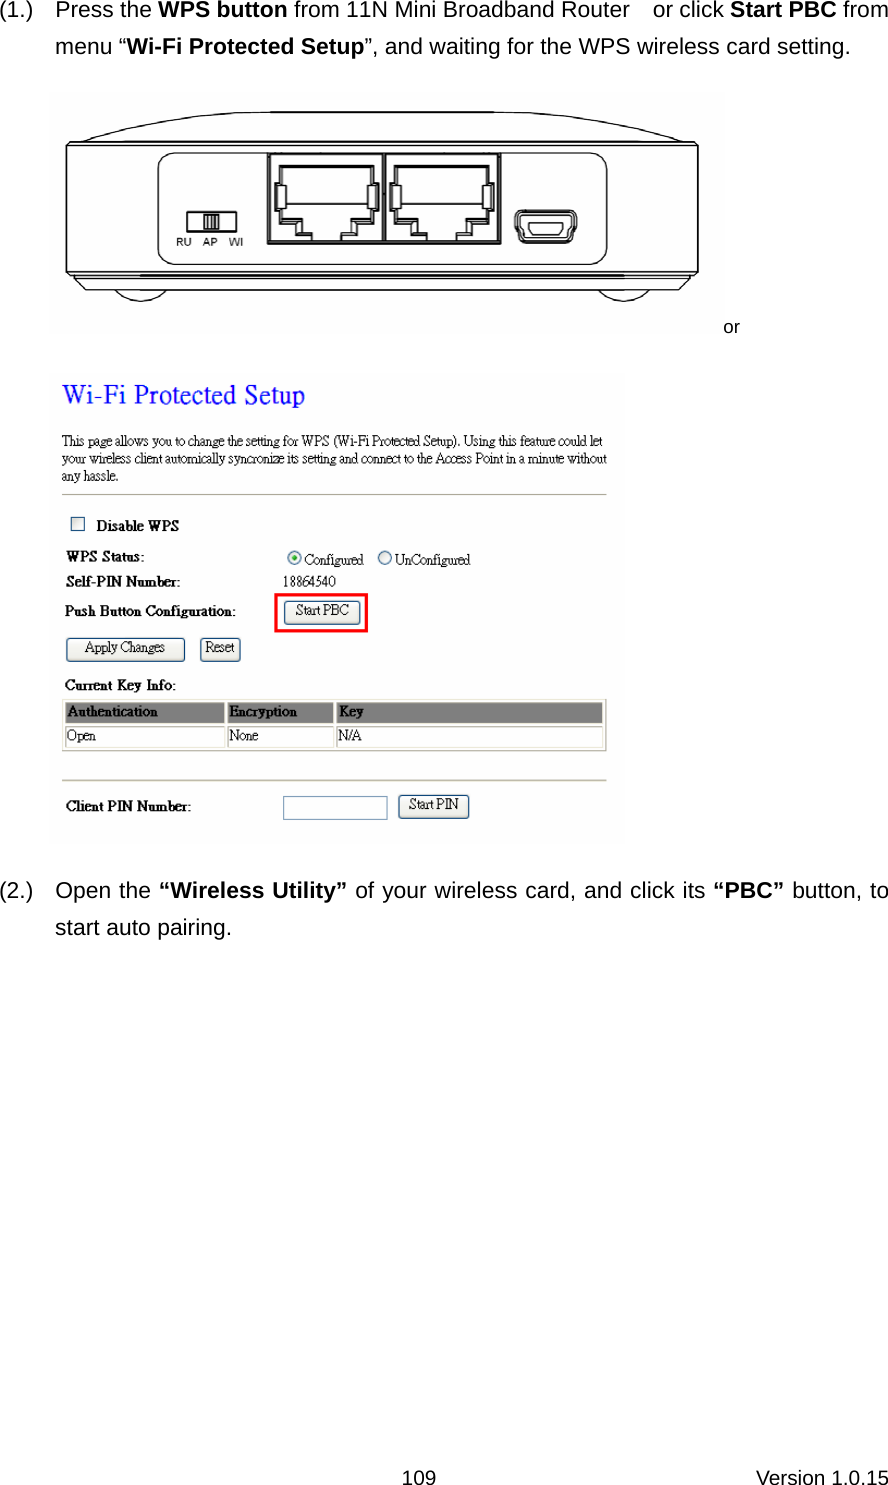 Version 1.0.15 109(1.) Press the WPS button from 11N Mini Broadband Router    or click Start PBC from menu “Wi-Fi Protected Setup”, and waiting for the WPS wireless card setting.   or  (2.) Open the “Wireless Utility” of your wireless card, and click its “PBC” button, to start auto pairing. 